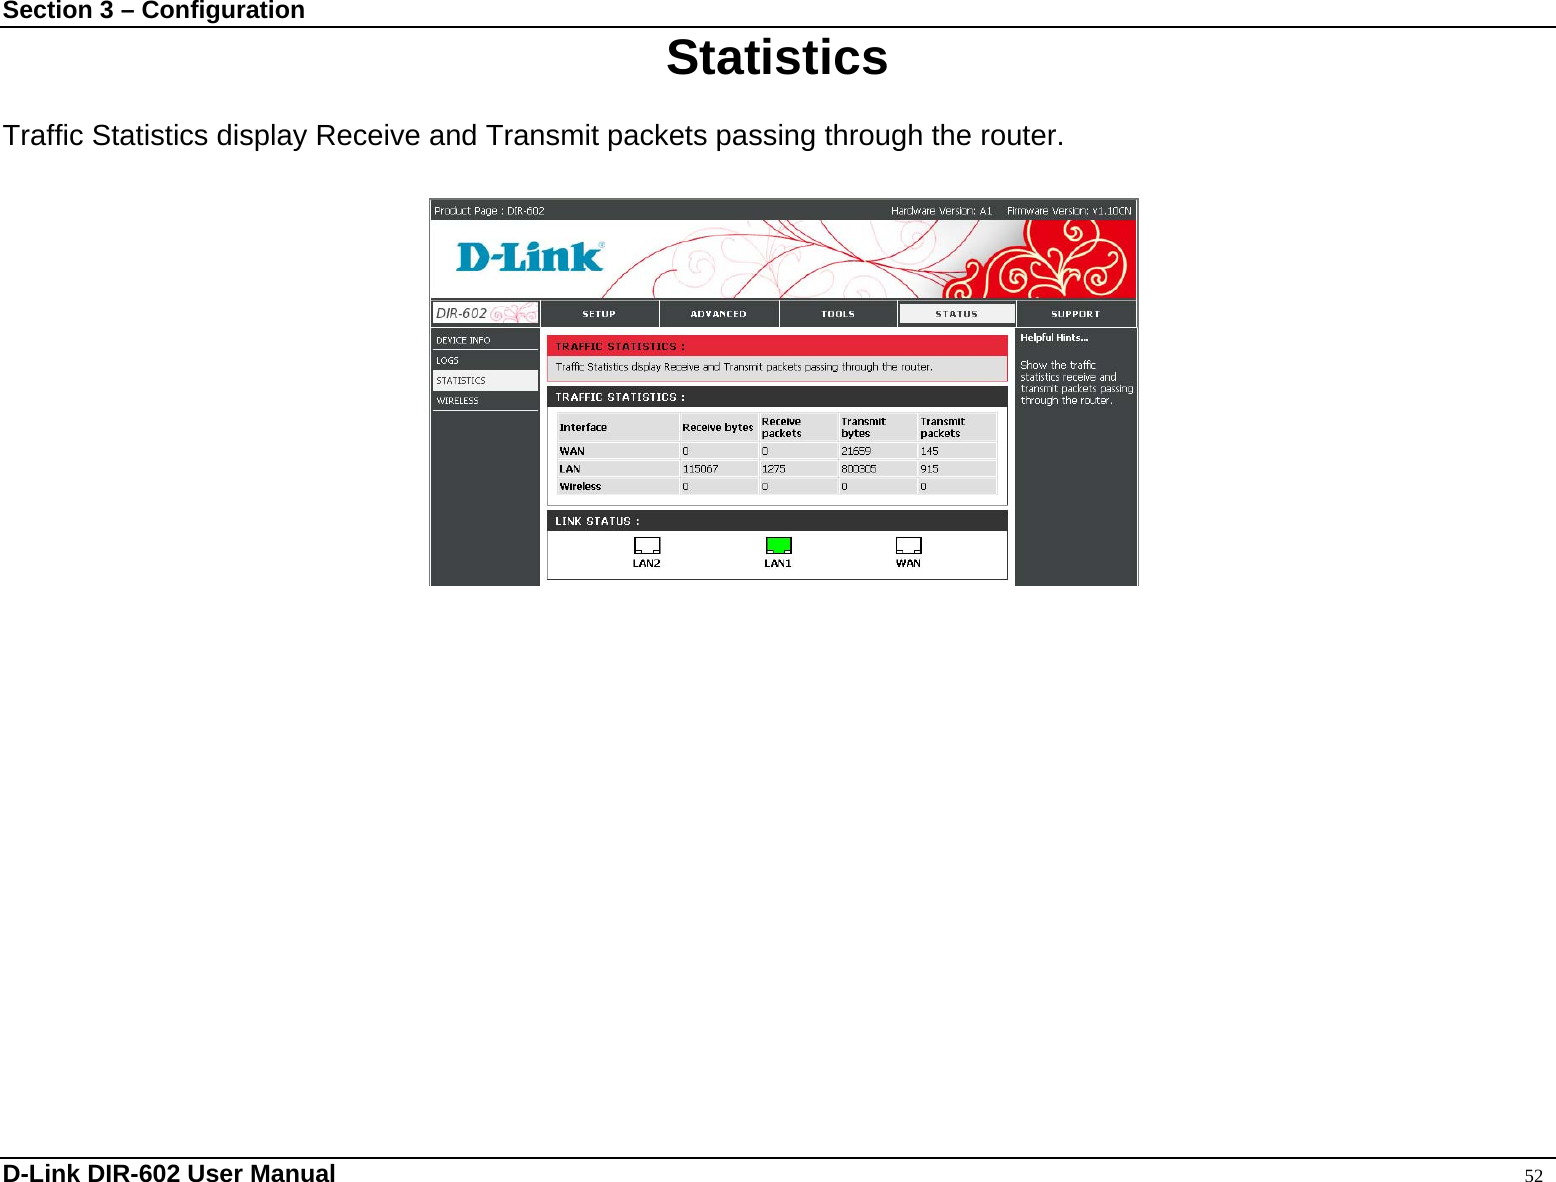 Section 3 – Configuration  Statistics  Traffic Statistics display Receive and Transmit packets passing through the router.                    D-Link DIR-602 User Manual                                                                                               52 